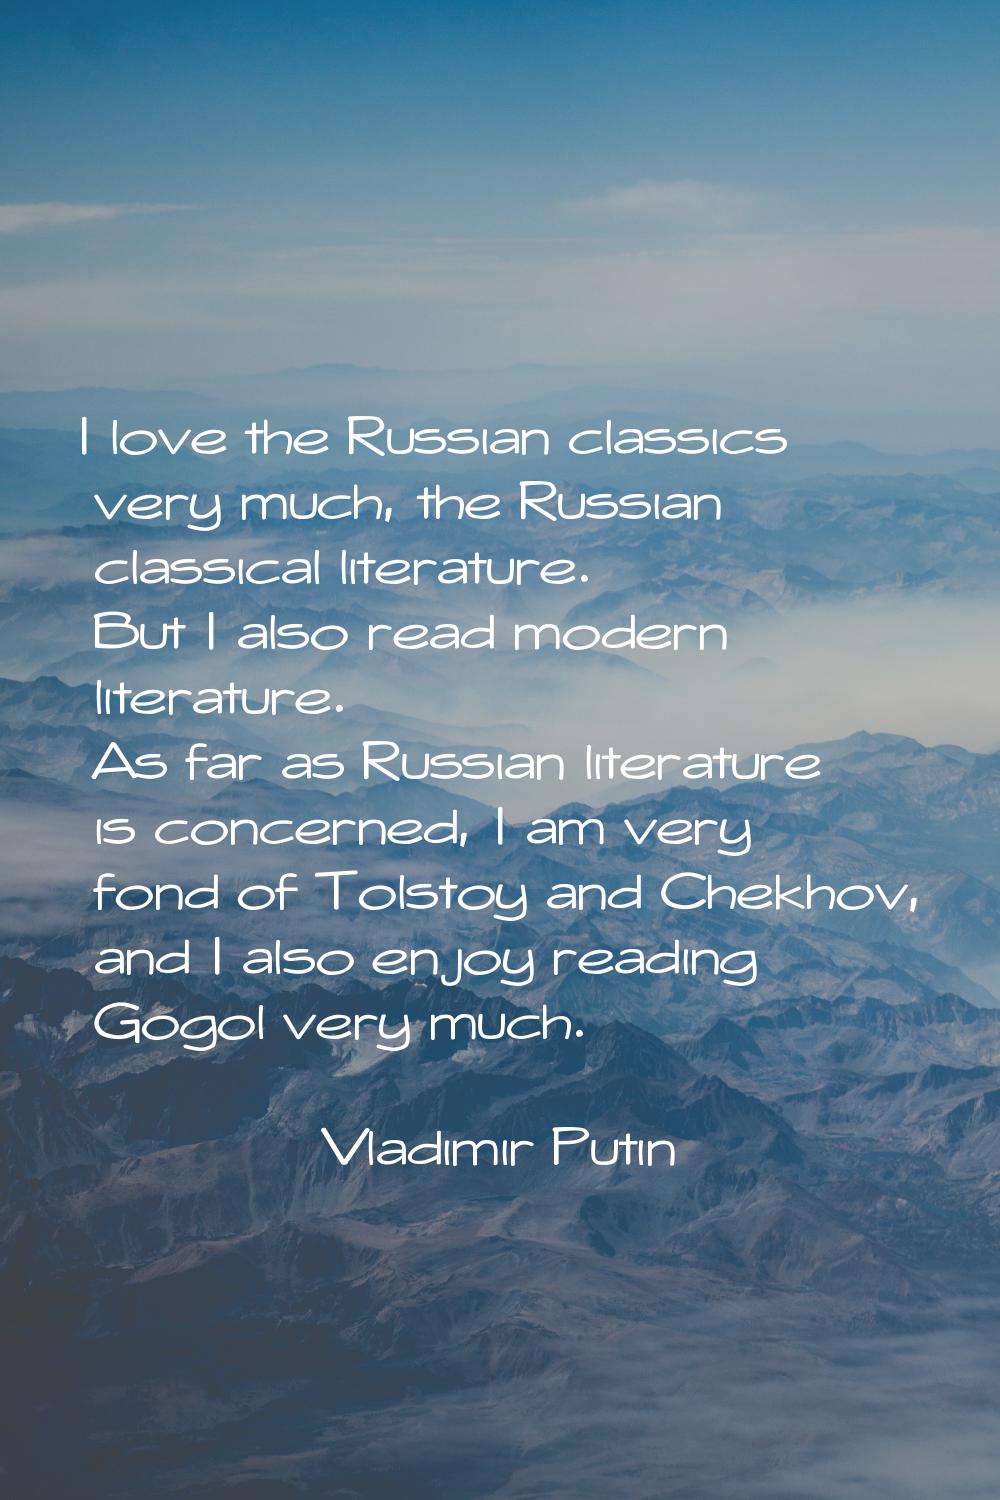 I love the Russian classics very much, the Russian classical literature. But I also read modern lit